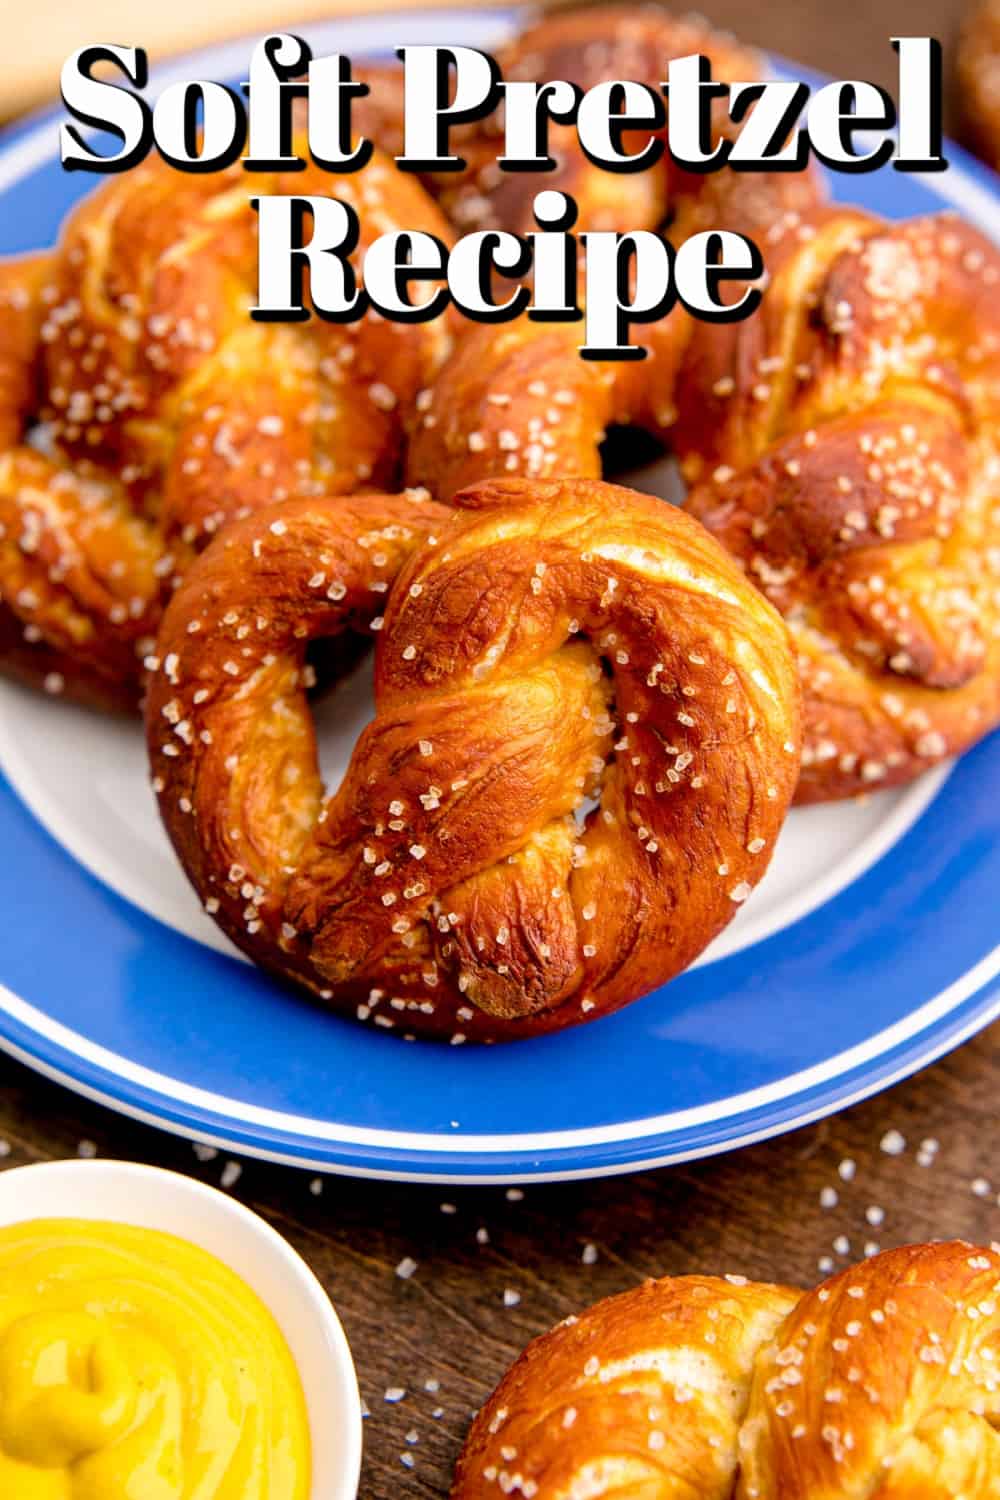 Soft Pretzel Recipe with Cheese Sauce Pin